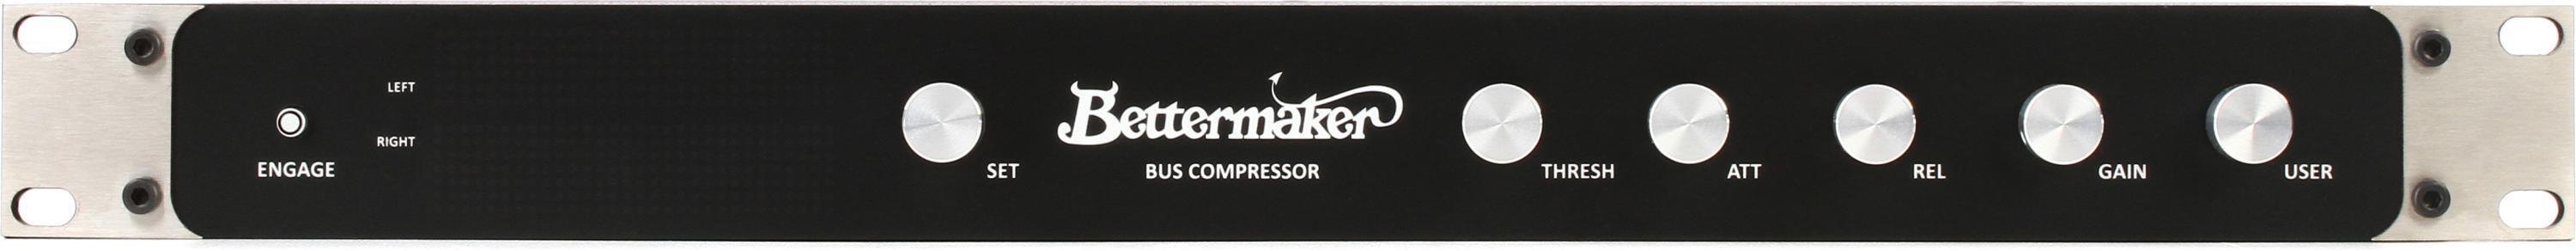 Bettermaker Bus Compressor with Plug-in Control | Sweetwater